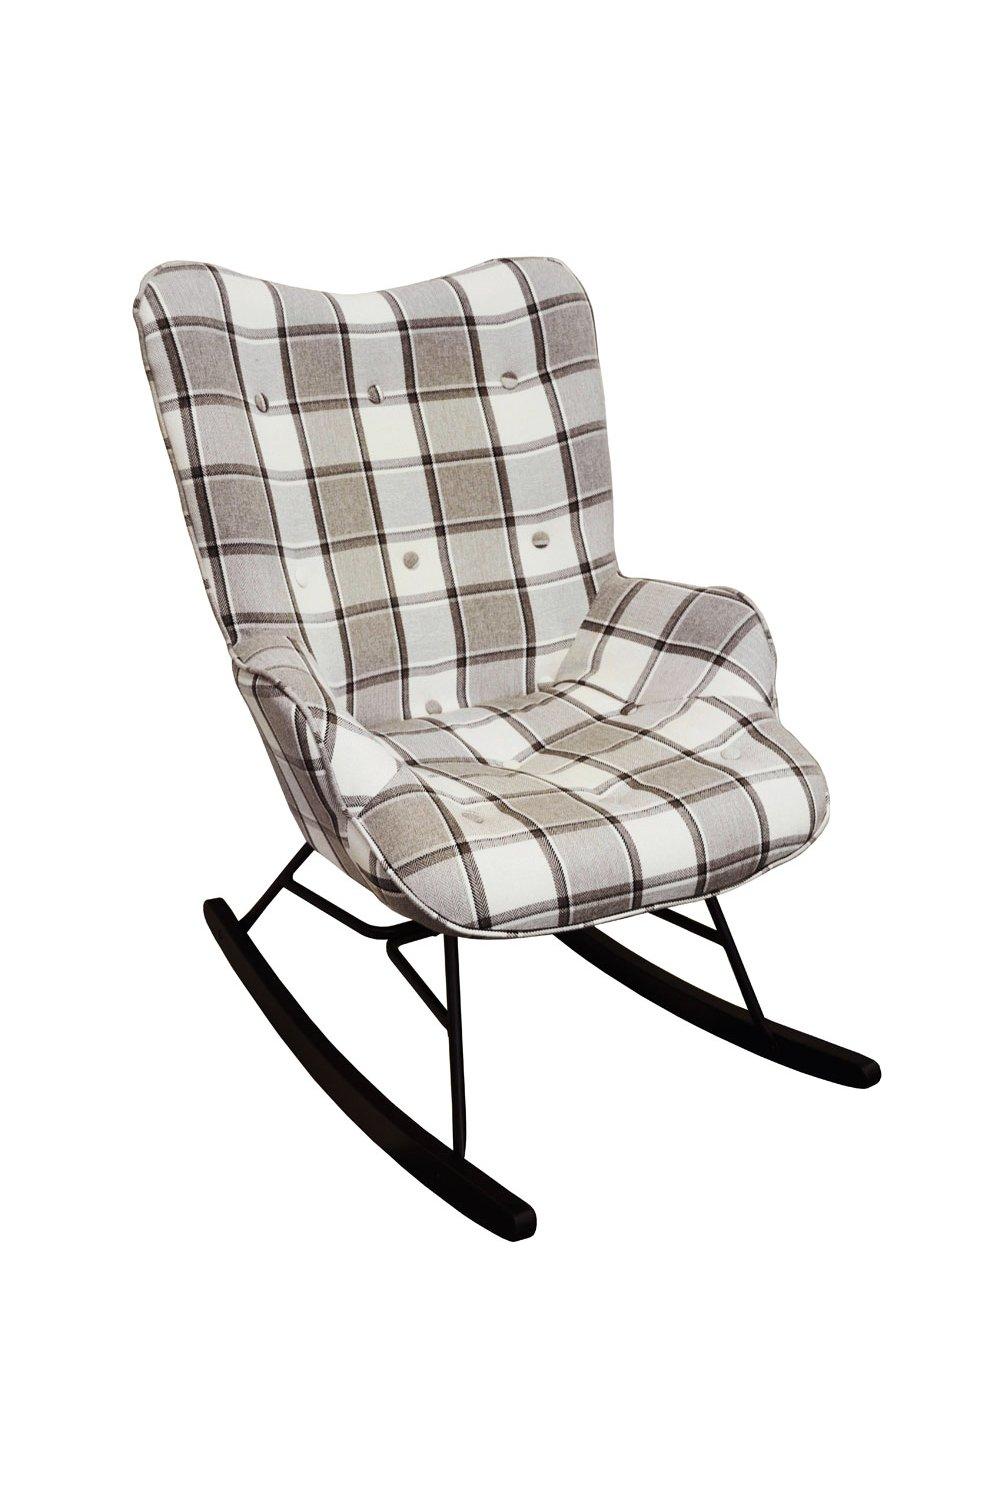 'Check' - Wing Back Rocking  Nursing Chair With Checked Tartan Fabric - Grey  White  Black